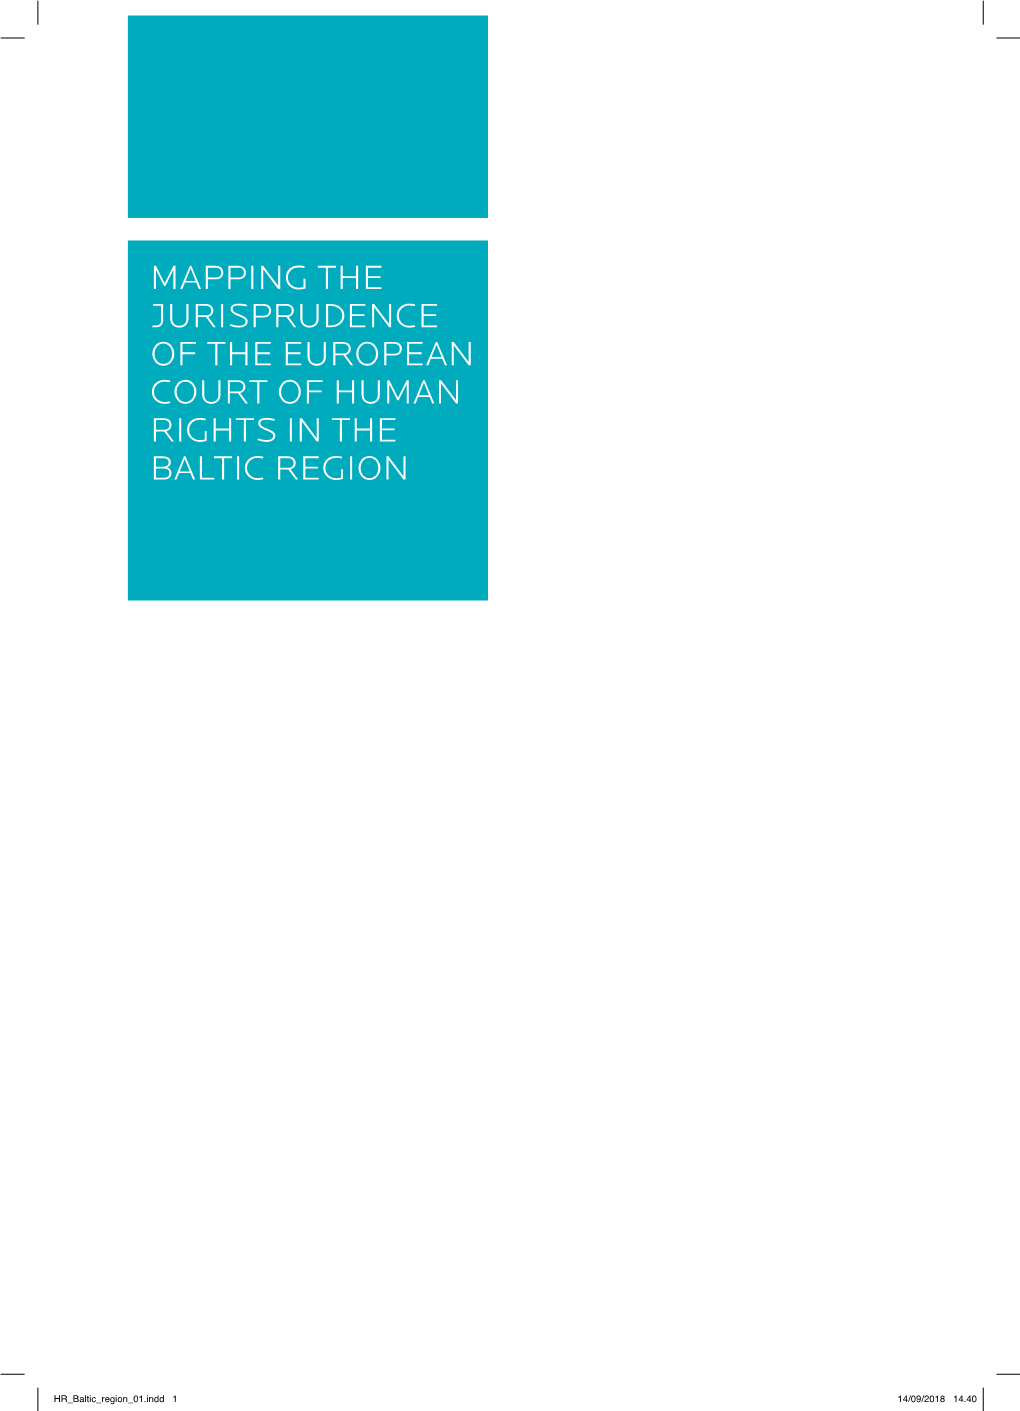 Report. Mapping the Jurisprucence of the ECHR in the Baltic Region Is Available for Download